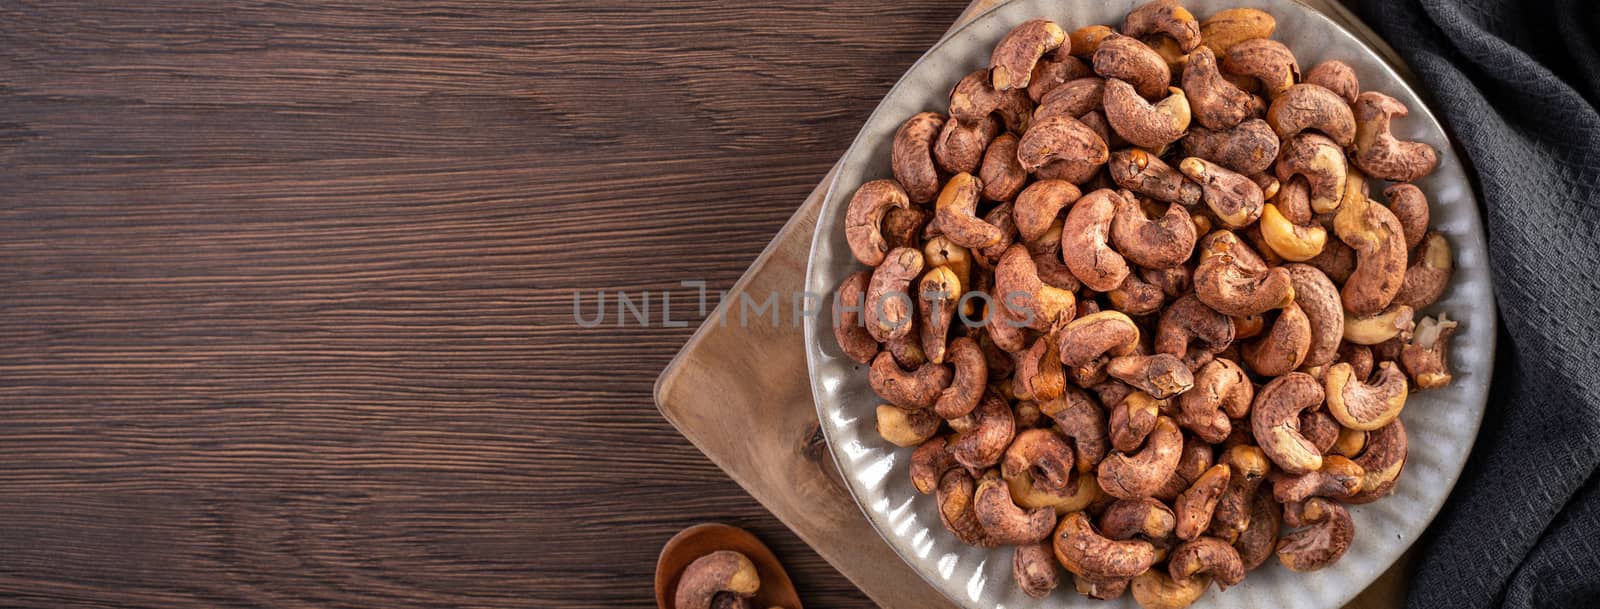 Cashew nuts with peel in a plate on wooden tray and table background, healthy raw food plate.